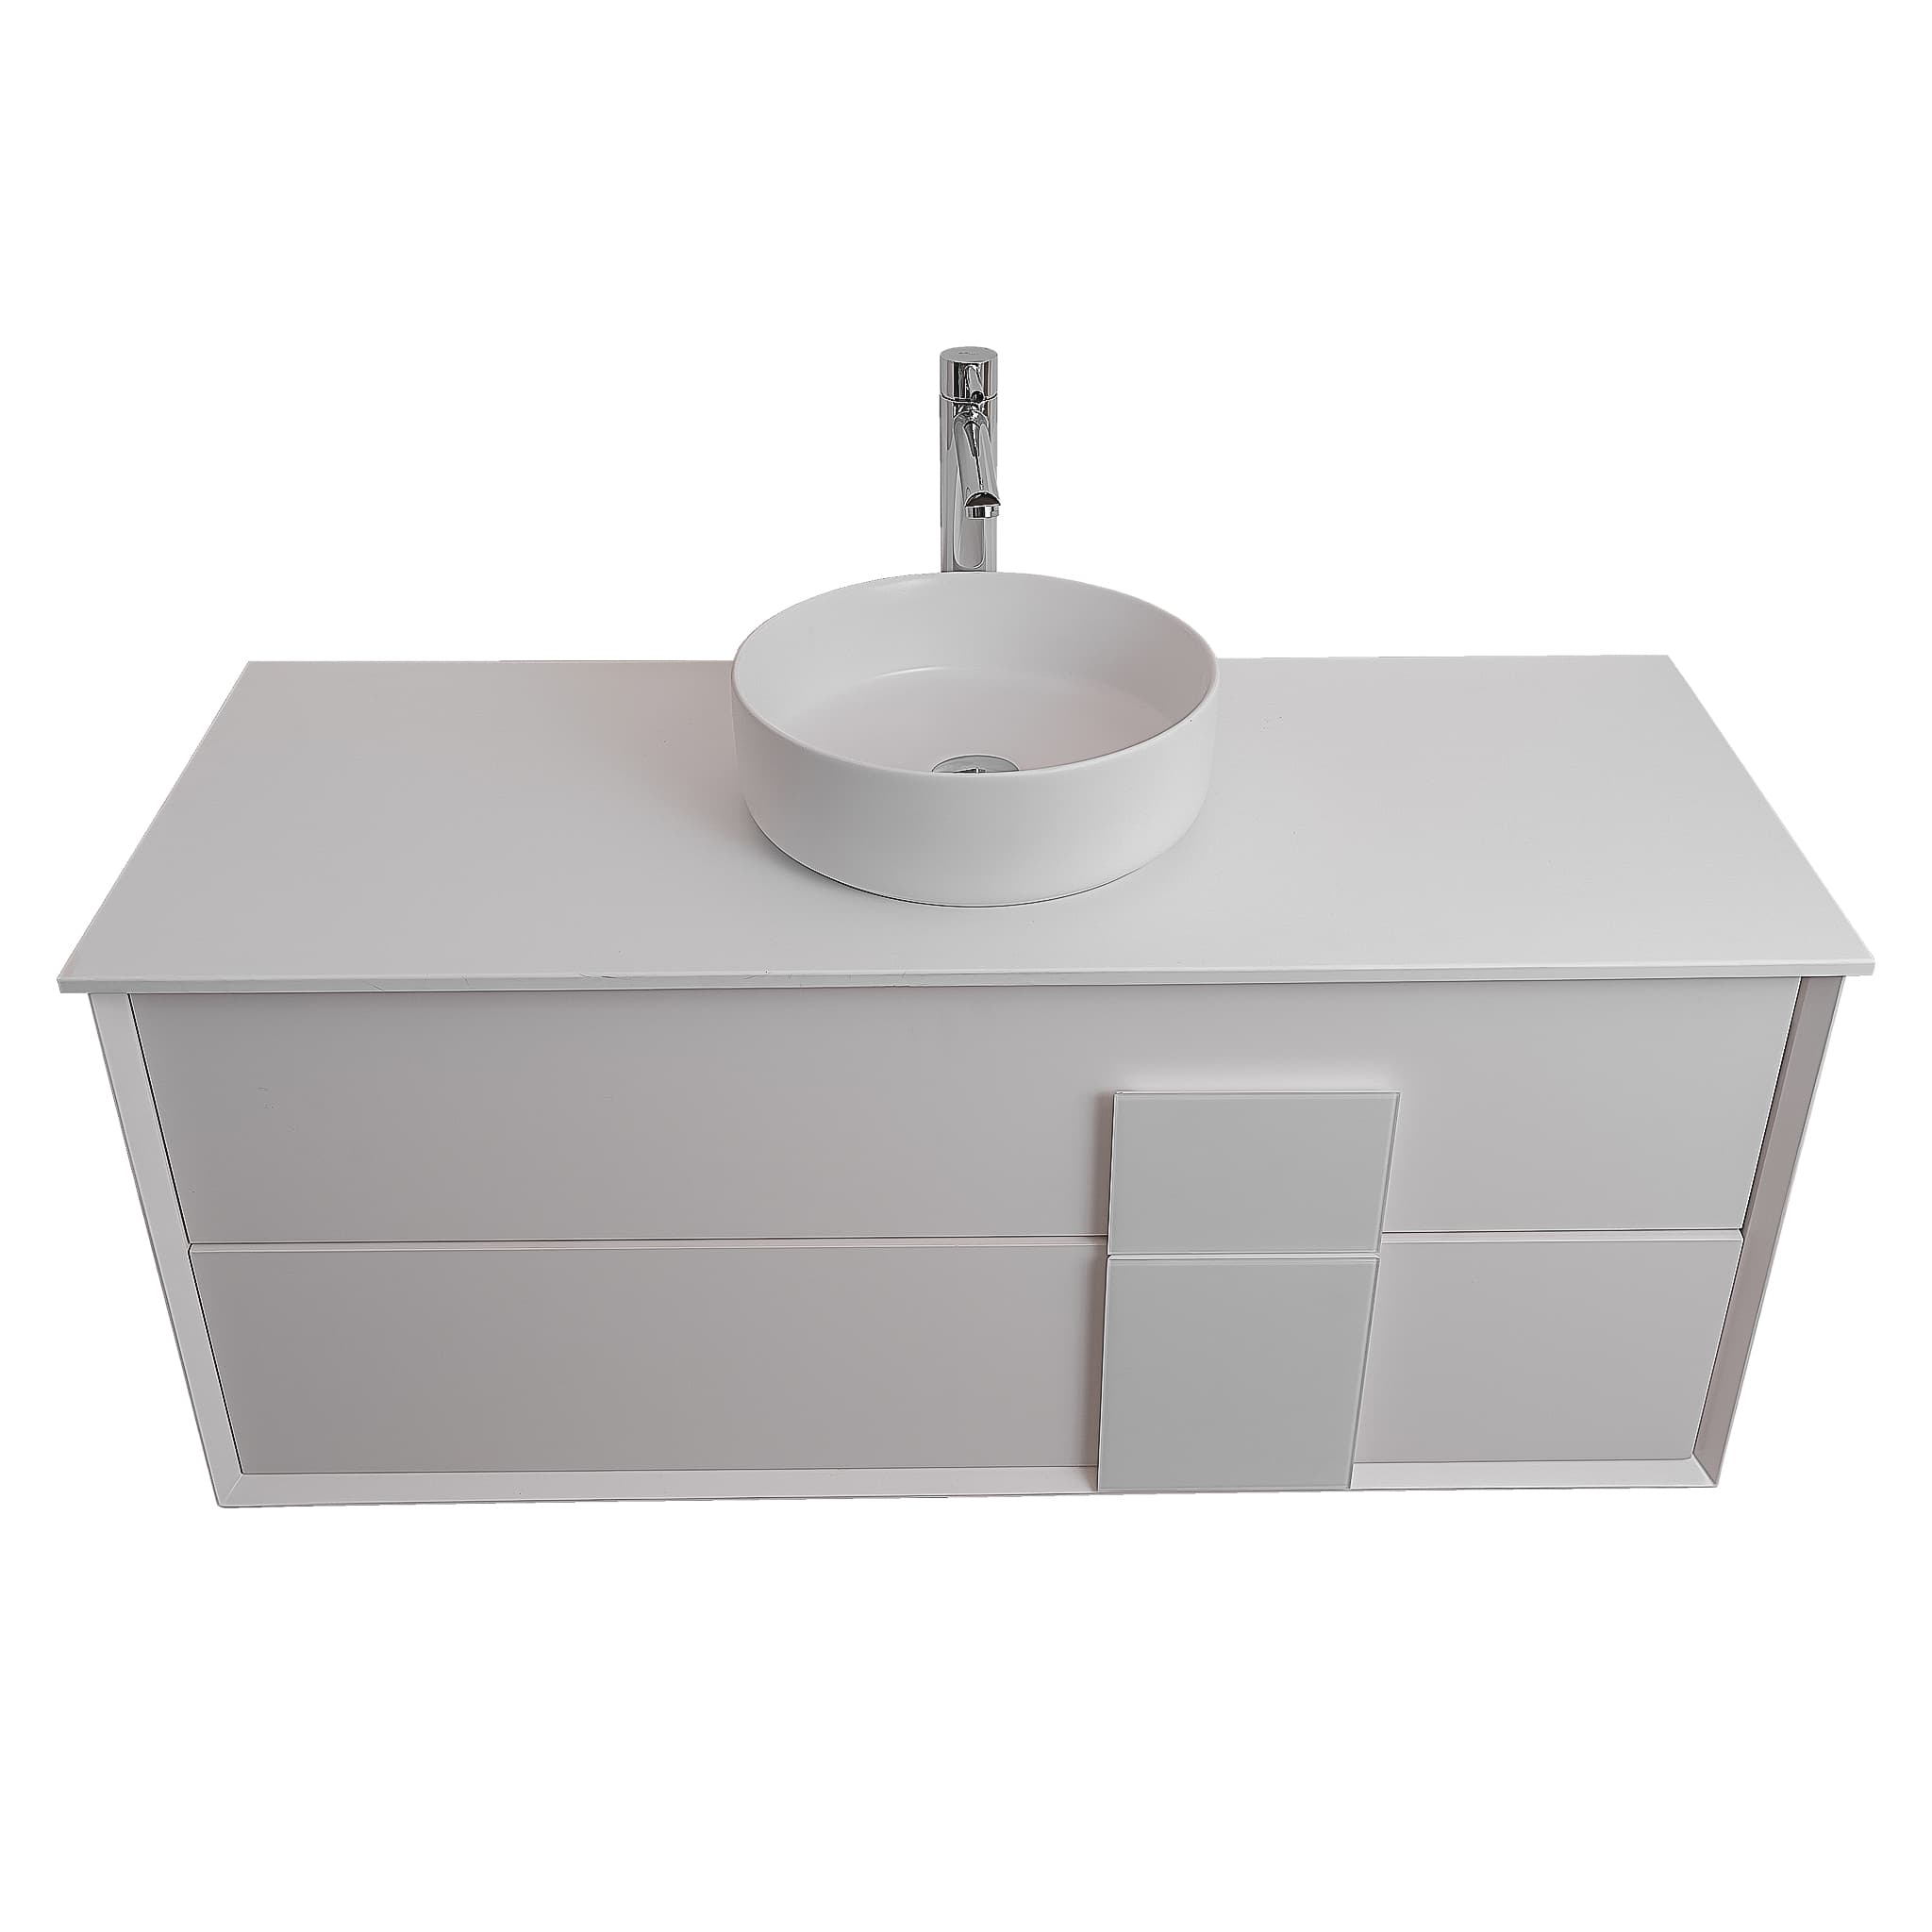 Piazza 47.5 Matte White With White Handle Cabinet, Ares White Top and Ares White Ceramic Basin, Wall Mounted Modern Vanity Set